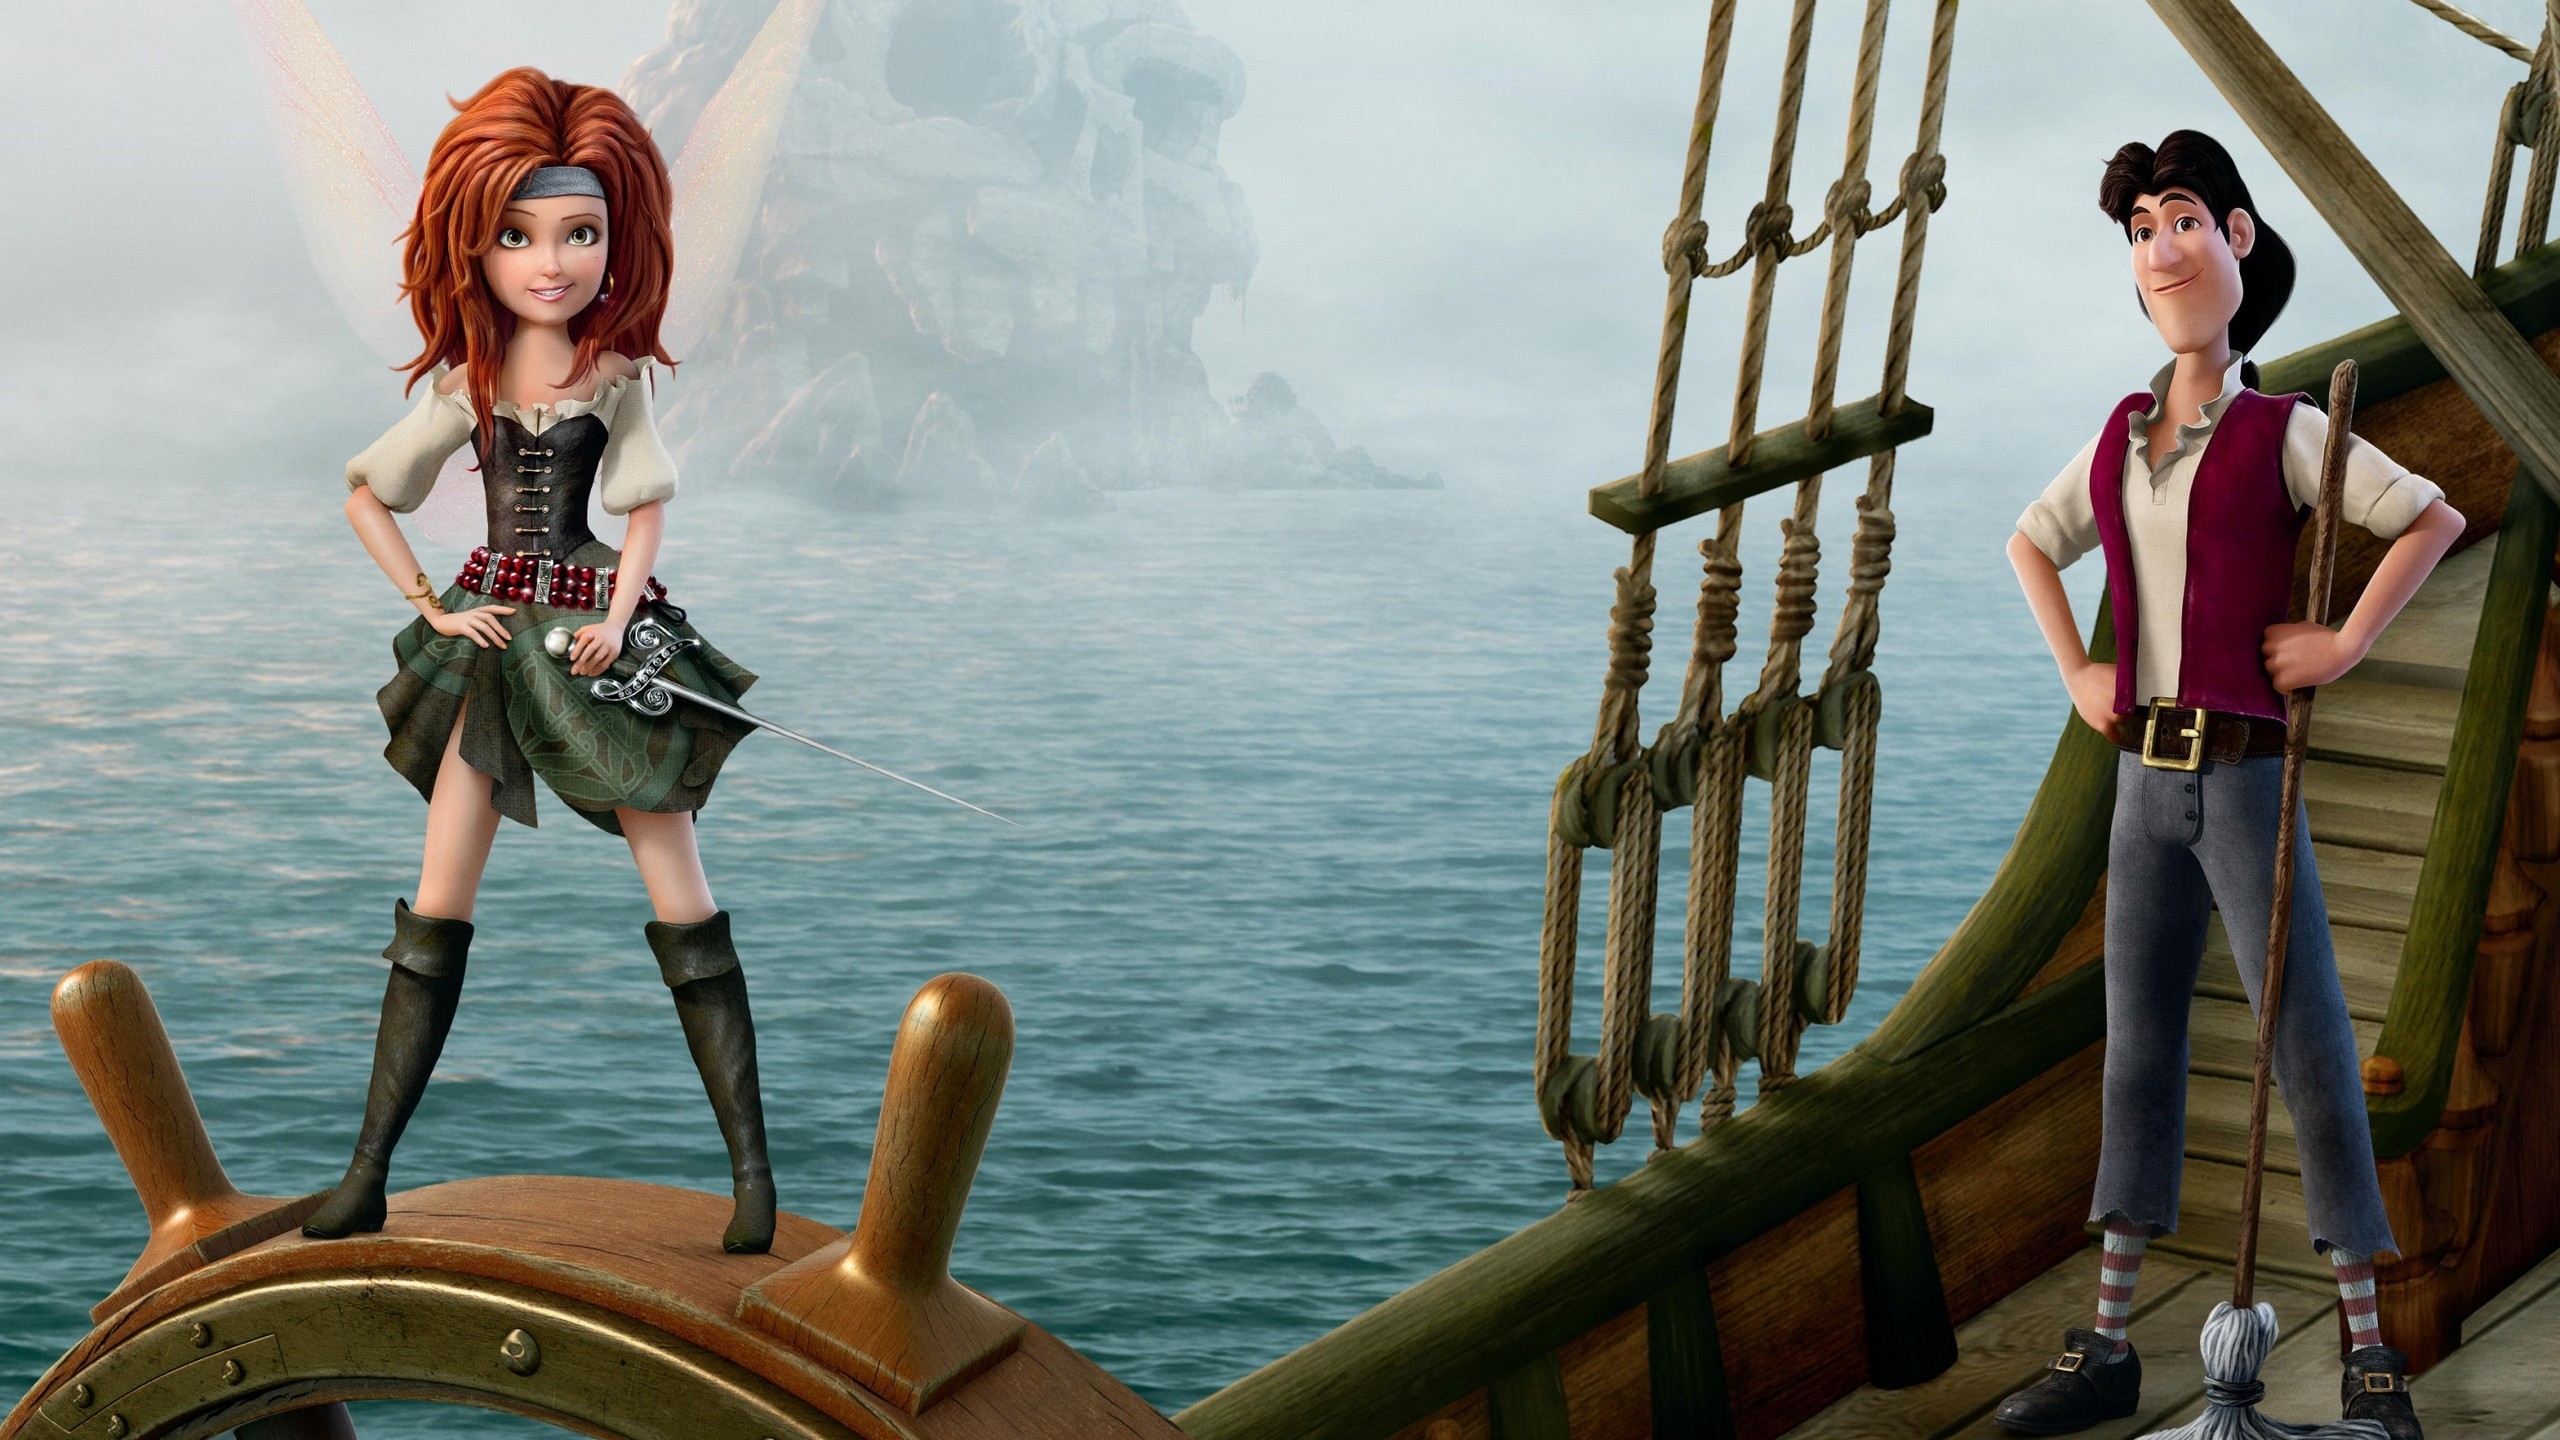 The Pirate Fairy for 2560x1440 HDTV resolution